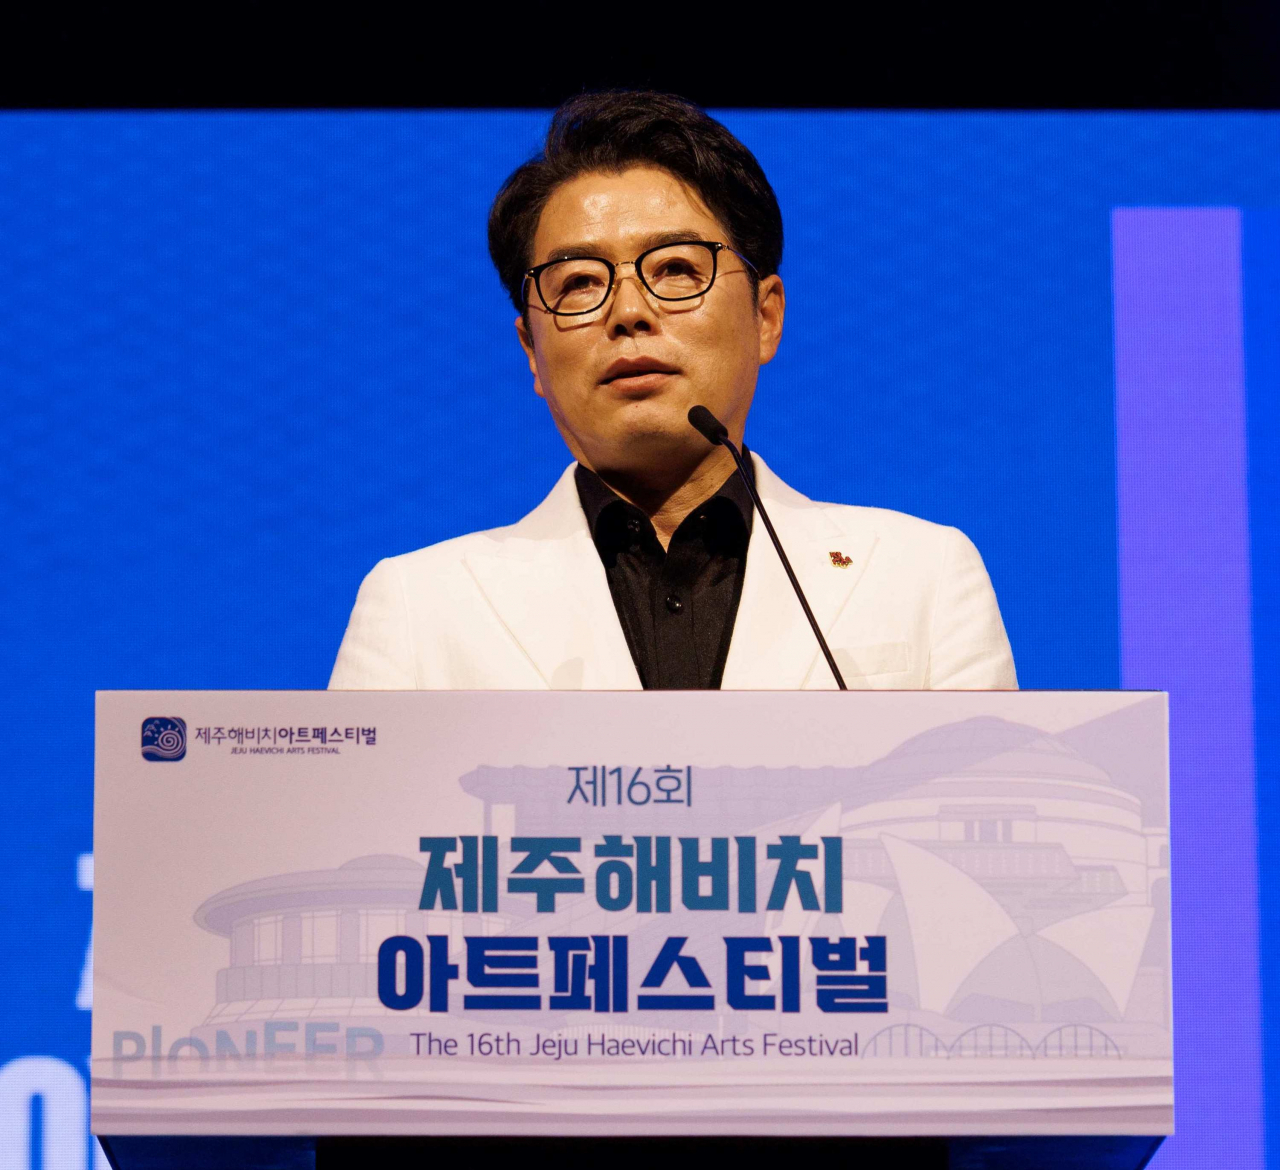 Lee Seung-joung, president of the Korea Culture and Arts Centers Association, speaks during the opening ceremony of the 16th Jeju Haevichi Arts Festival on Monday at Haevichi Hotel and Resorts, Jeju Island. (Kocaca)